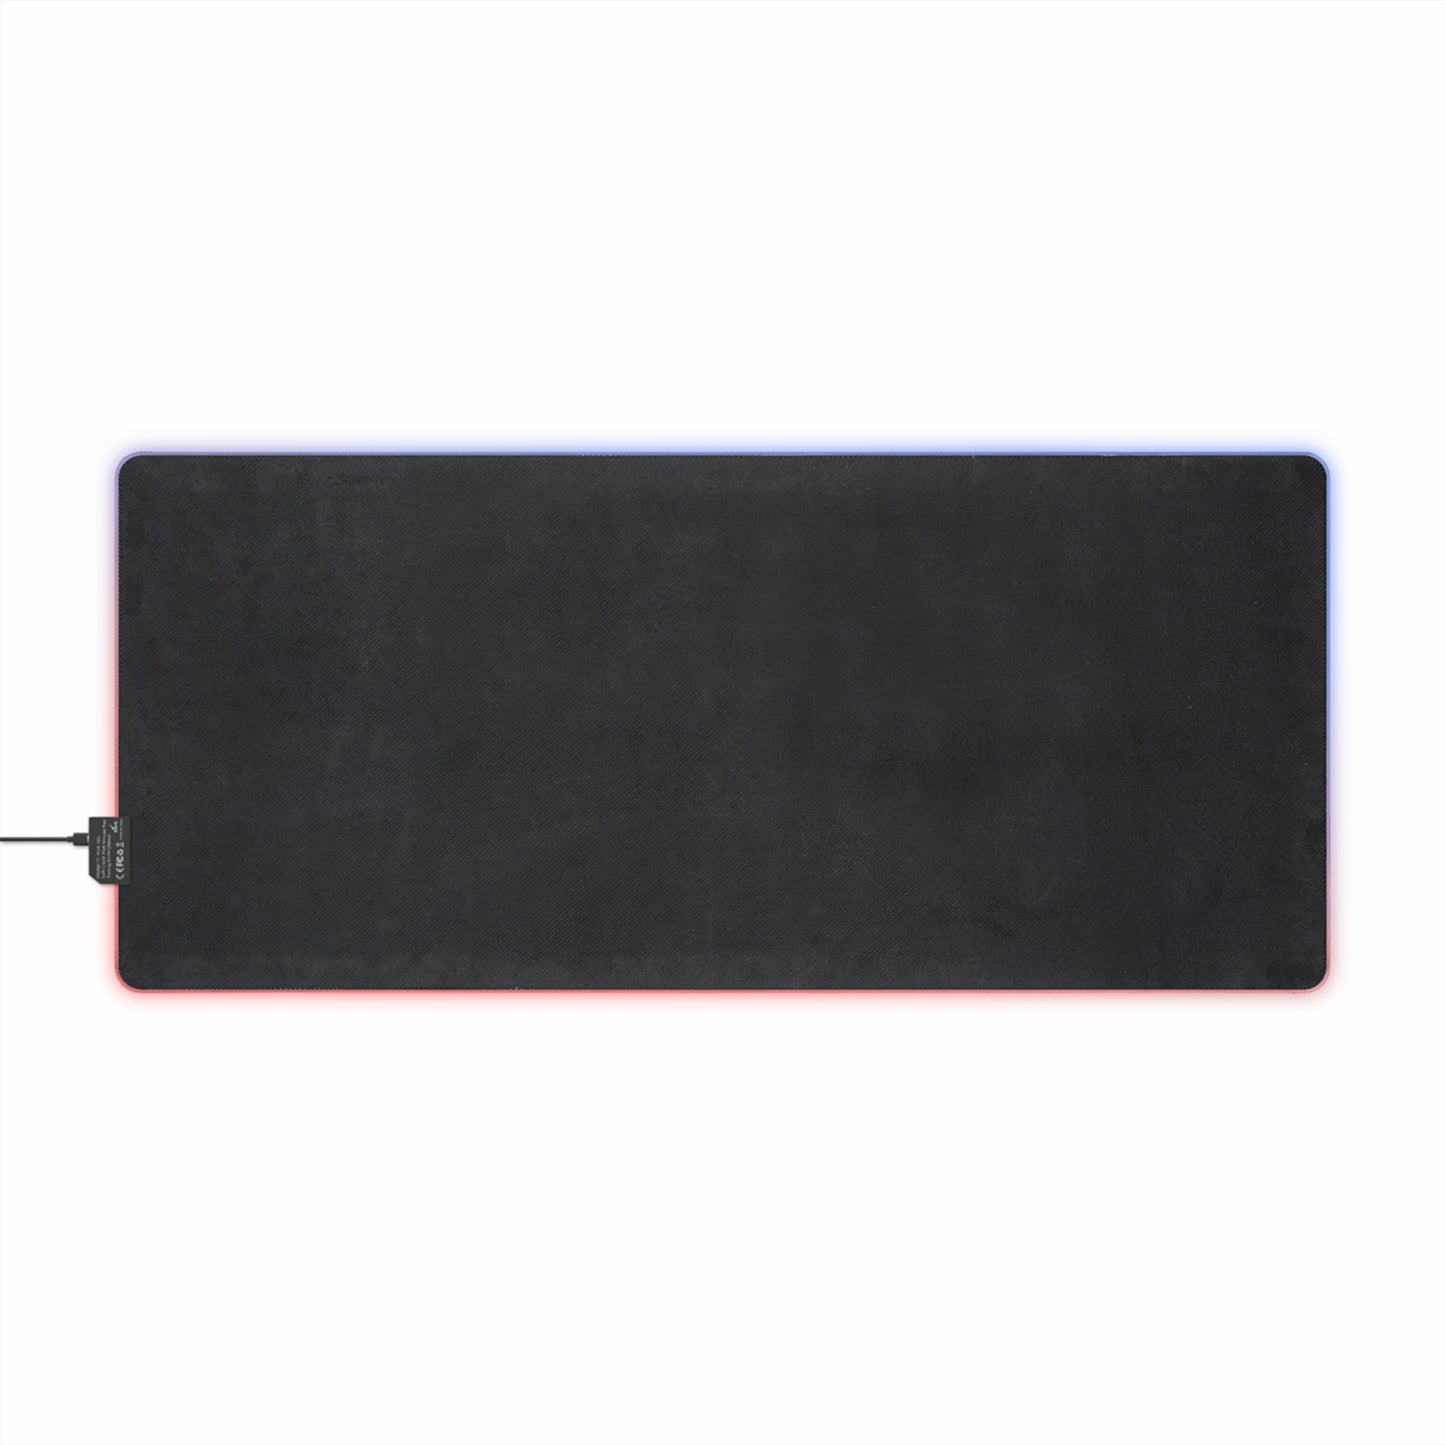 CLMP-4 LED Gaming Mouse Pad